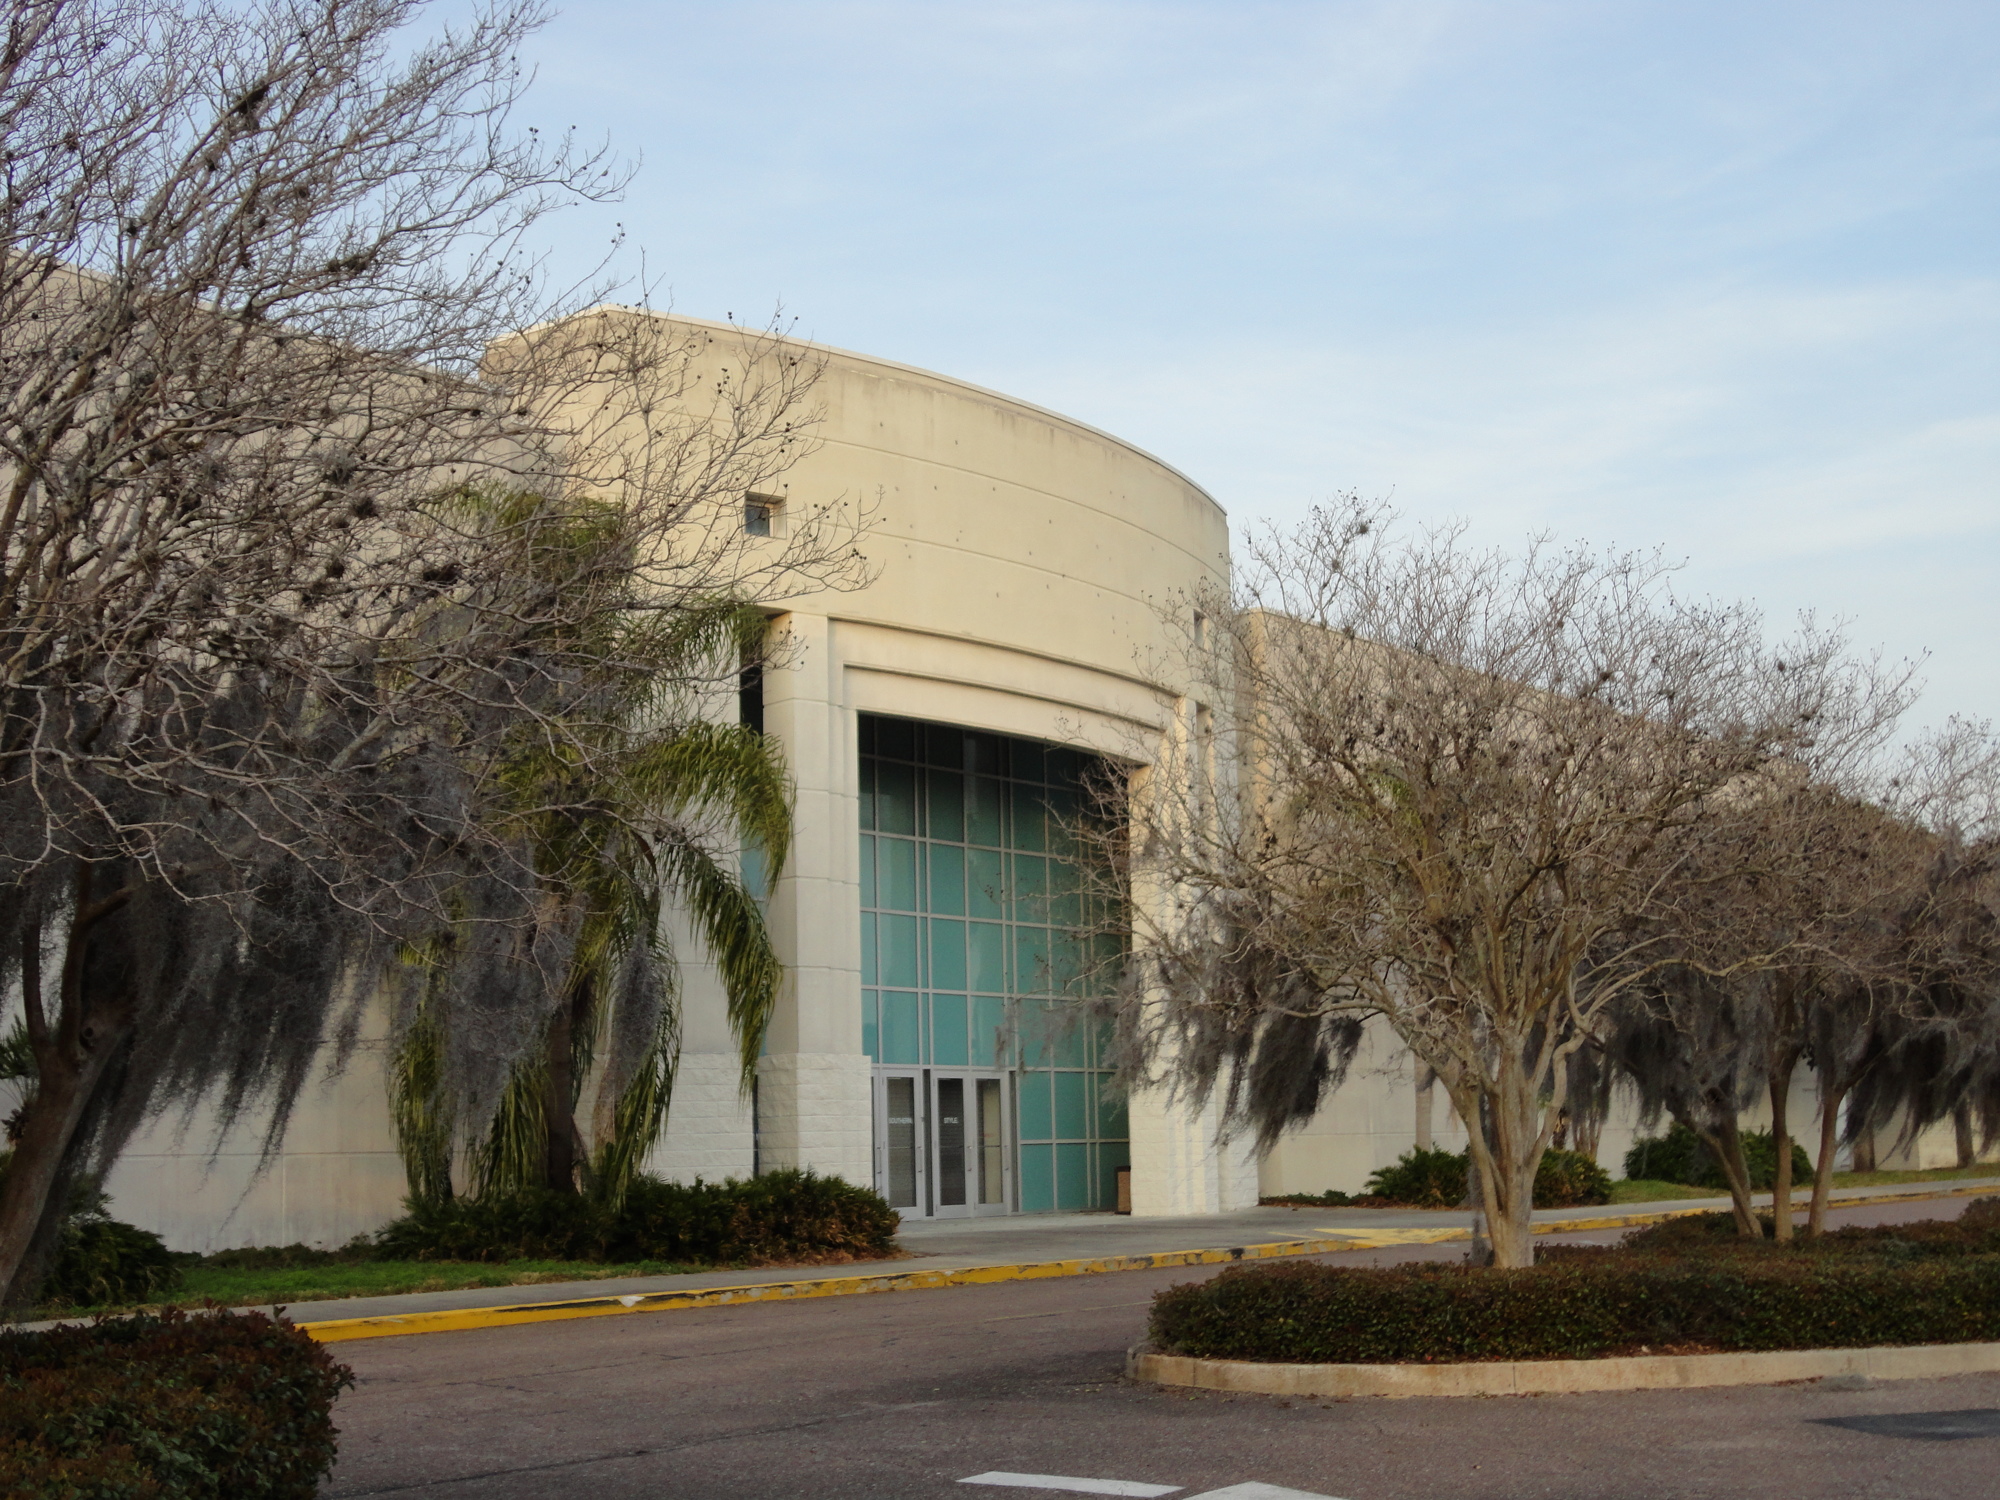 The former Jacksonville Automotive & Motorcycle Museum had planned to move into the former Montgomery Ward store at Regency Square Mall.